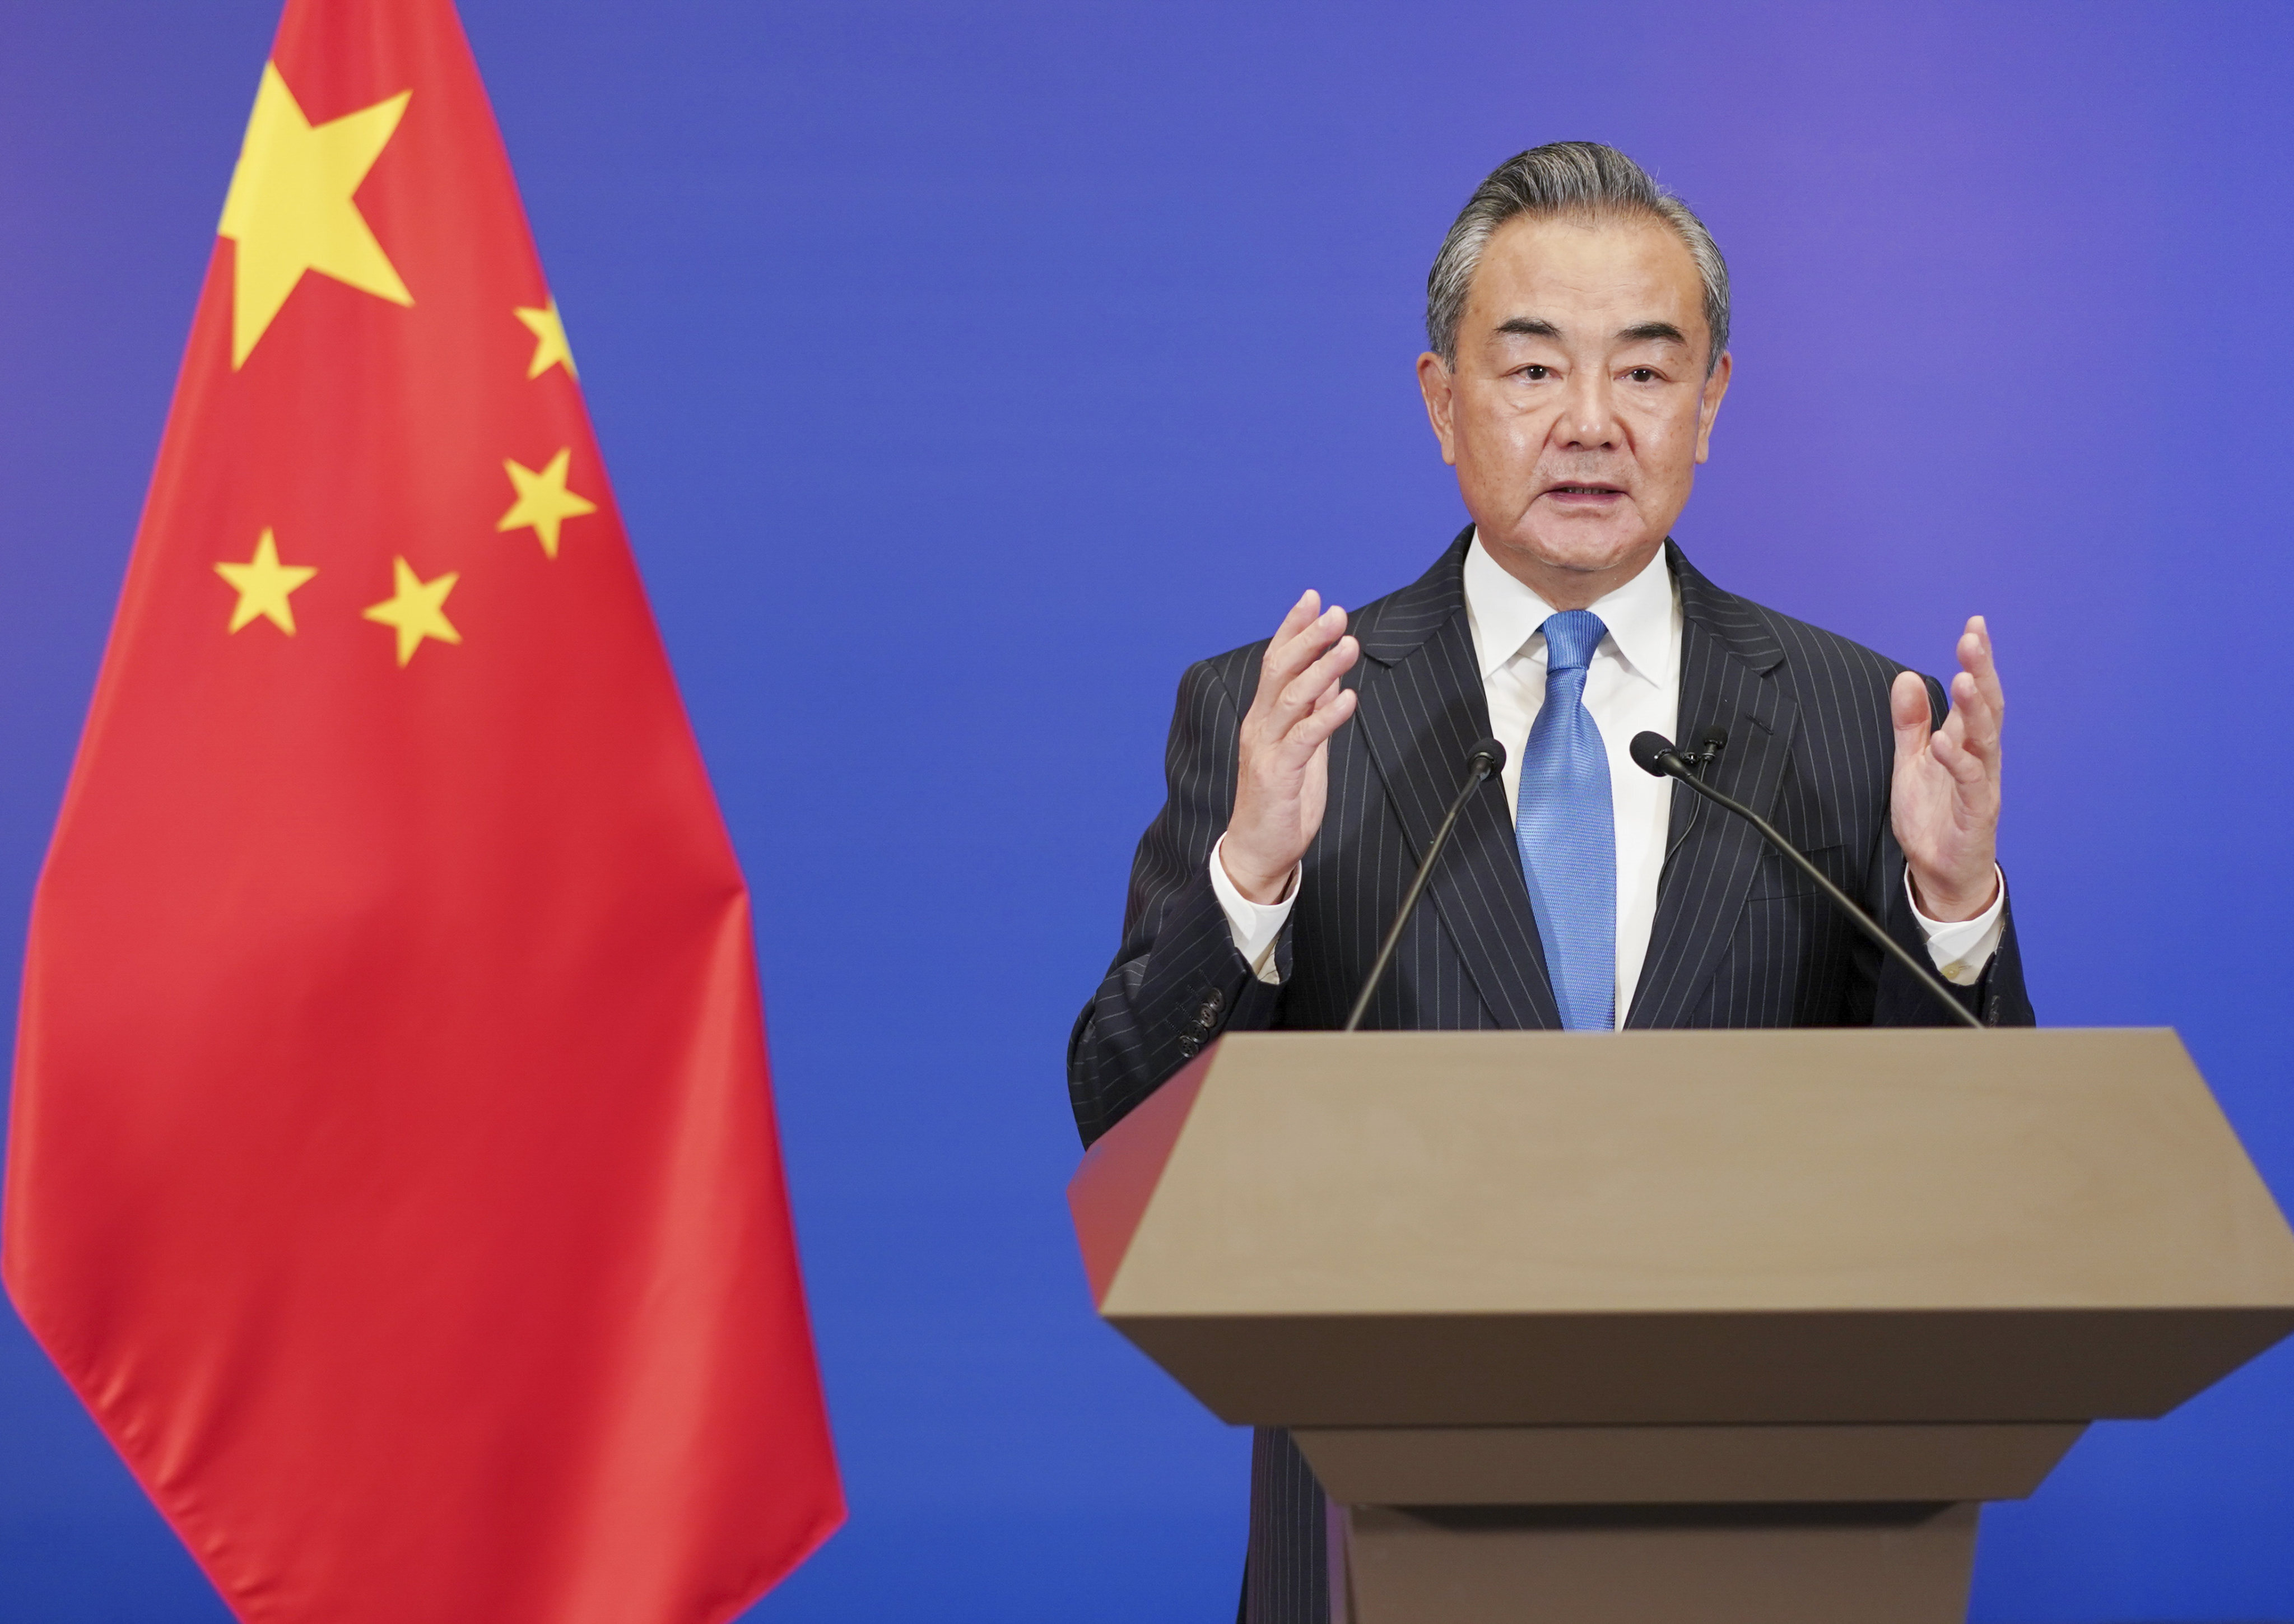 Chinese Foreign Minister Wang Yi said claims of Uygur repression are ‘lies’. Photo: Xinhua